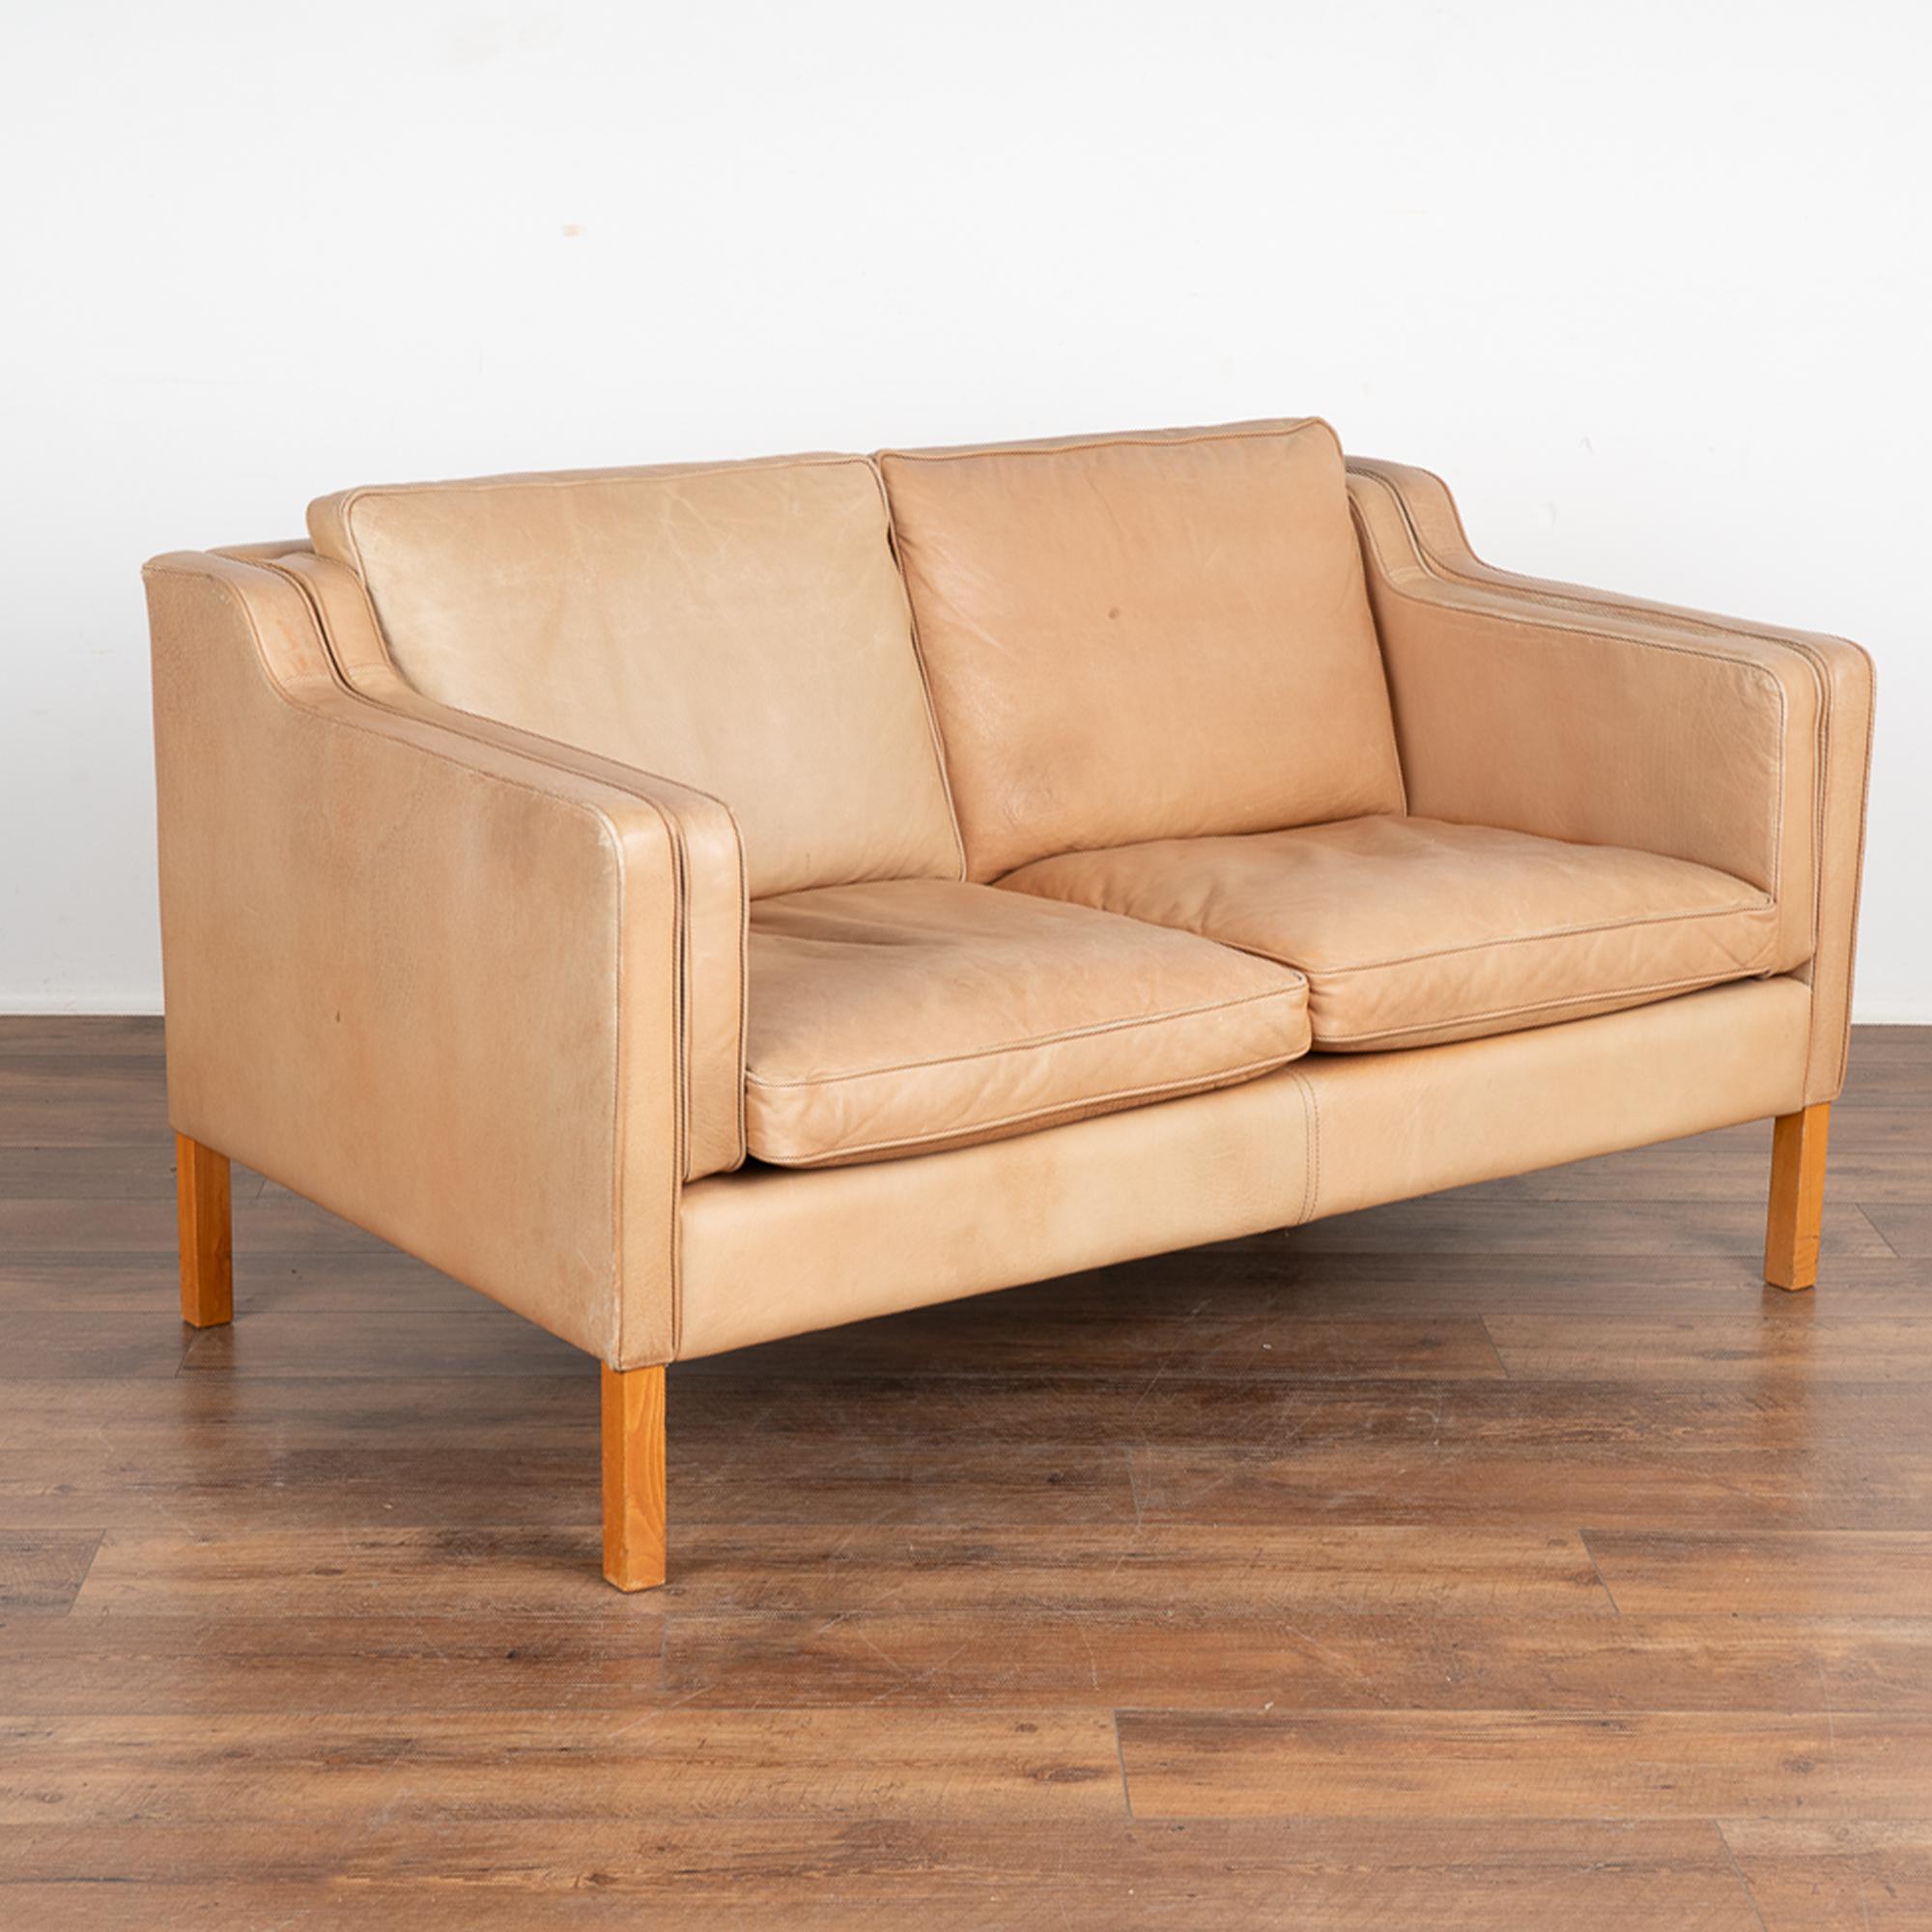 Mid-century modern vintage two seat leather Stouby sofa or loveseat from Denmark. This comfortable sofa combines tradition with modern lines.
Upholstered in camel or light brown leather, loose cushions, hardwood legs in stained beech wood. 
Sold in